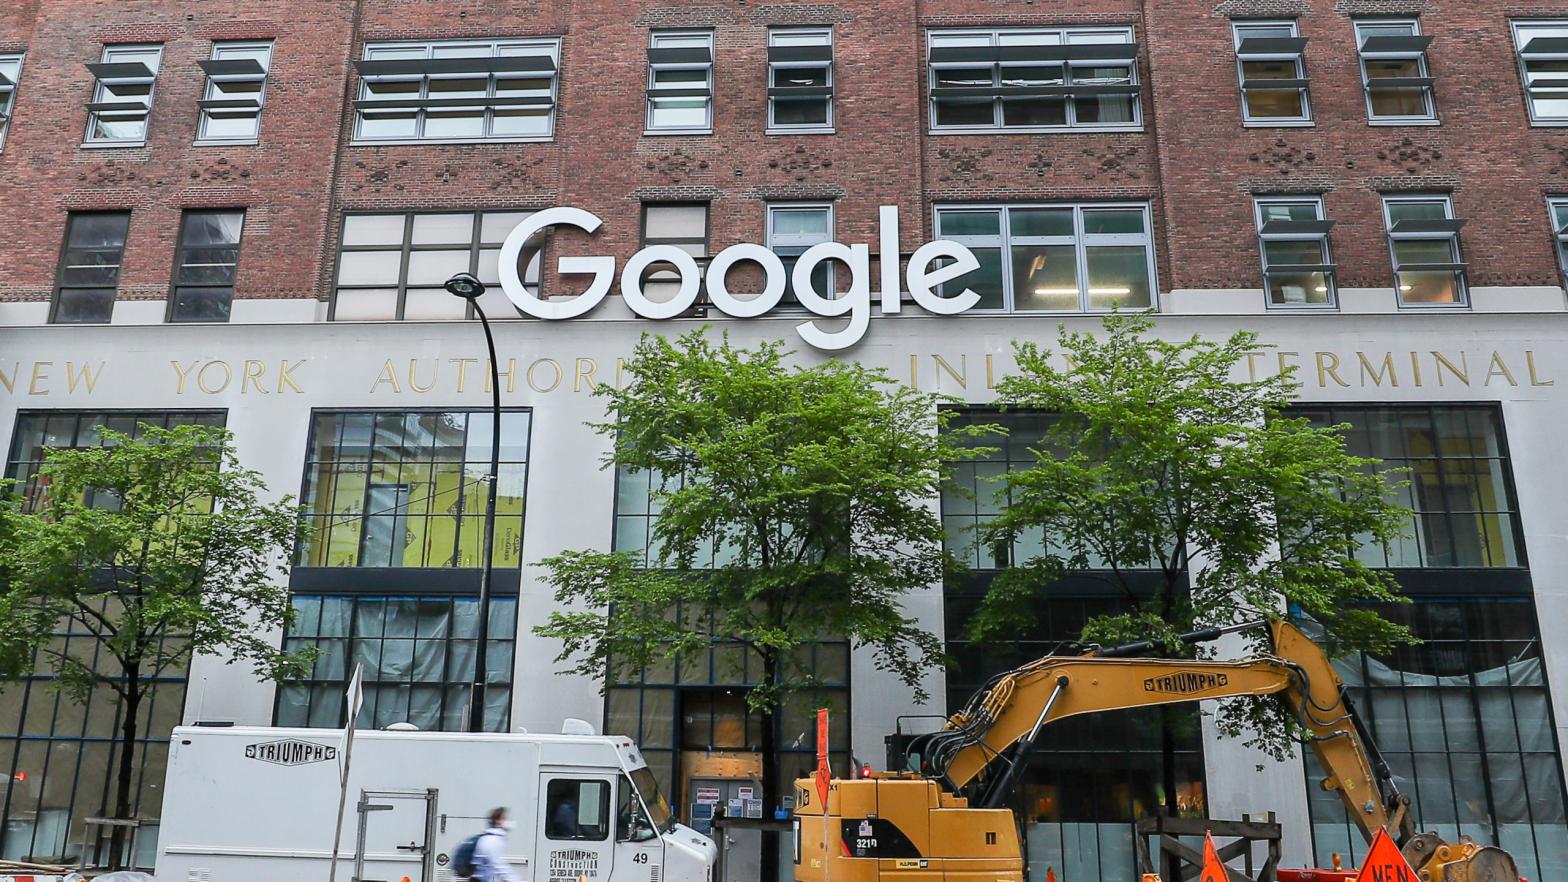 Google's New York offices in April 2020. (Photo: Arturo Holmes, Getty Images)